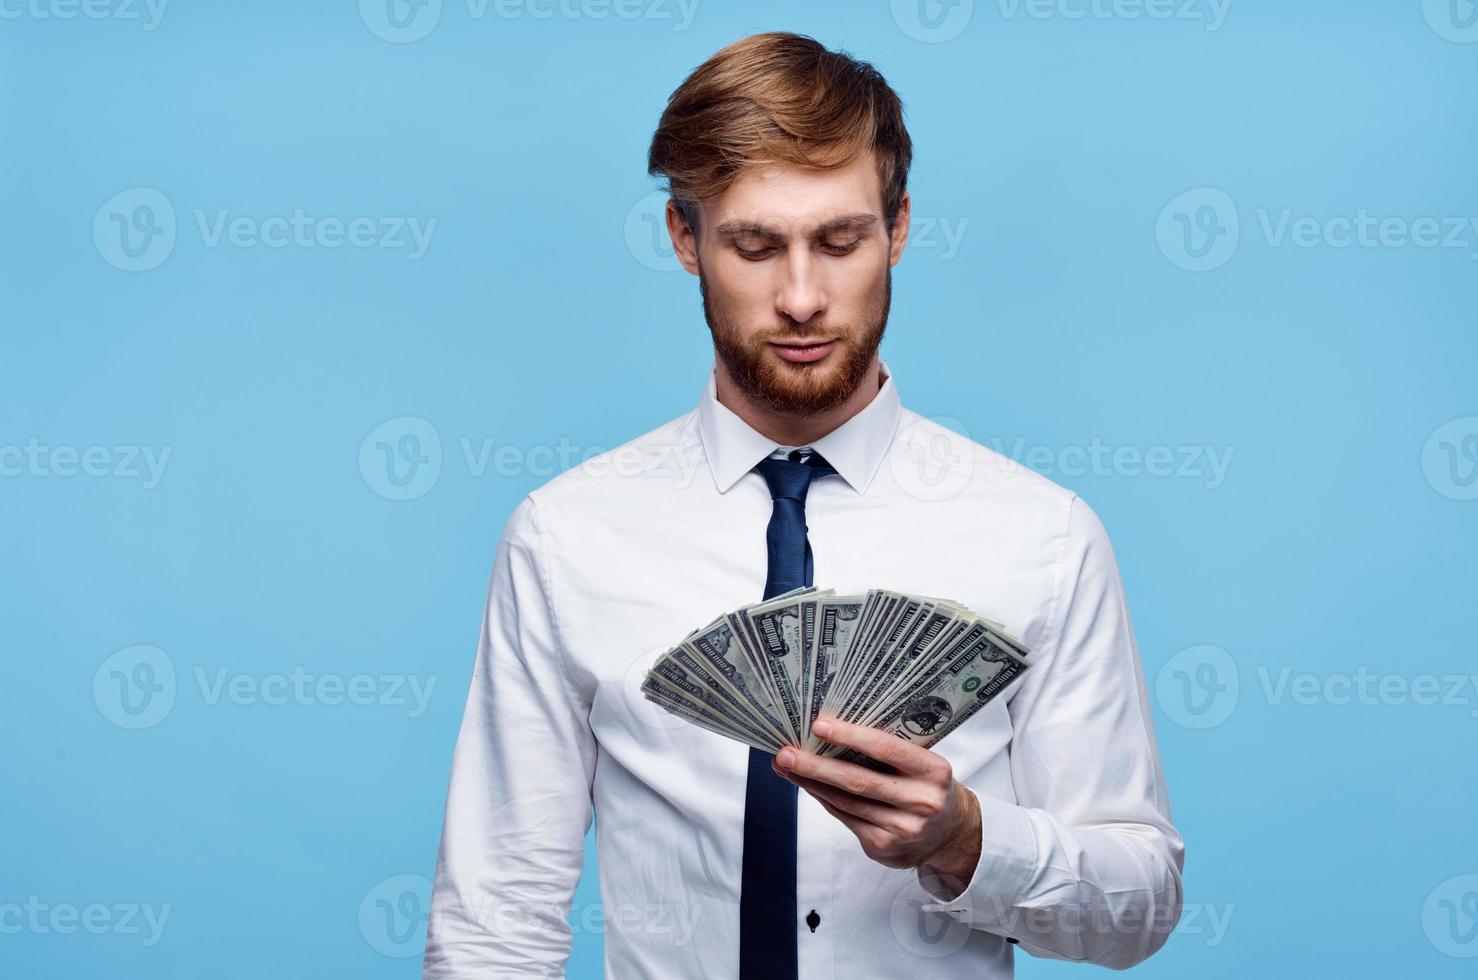 business man in shirt with tie bundle of money in the hands of the office photo